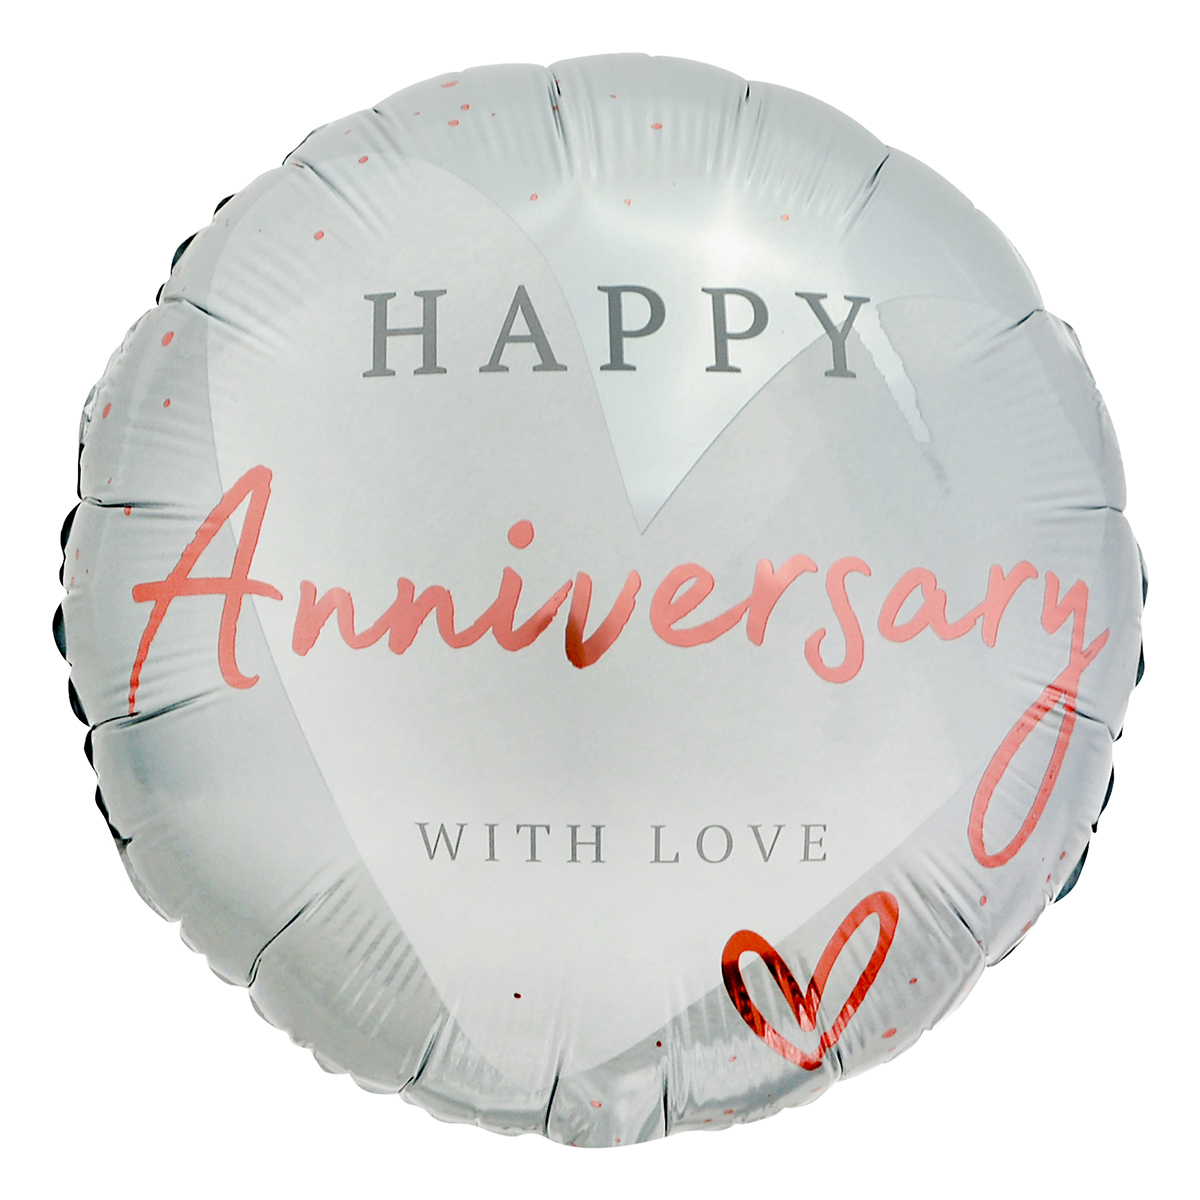 With Love Happy Anniversary 18-Inch Foil Helium Balloon